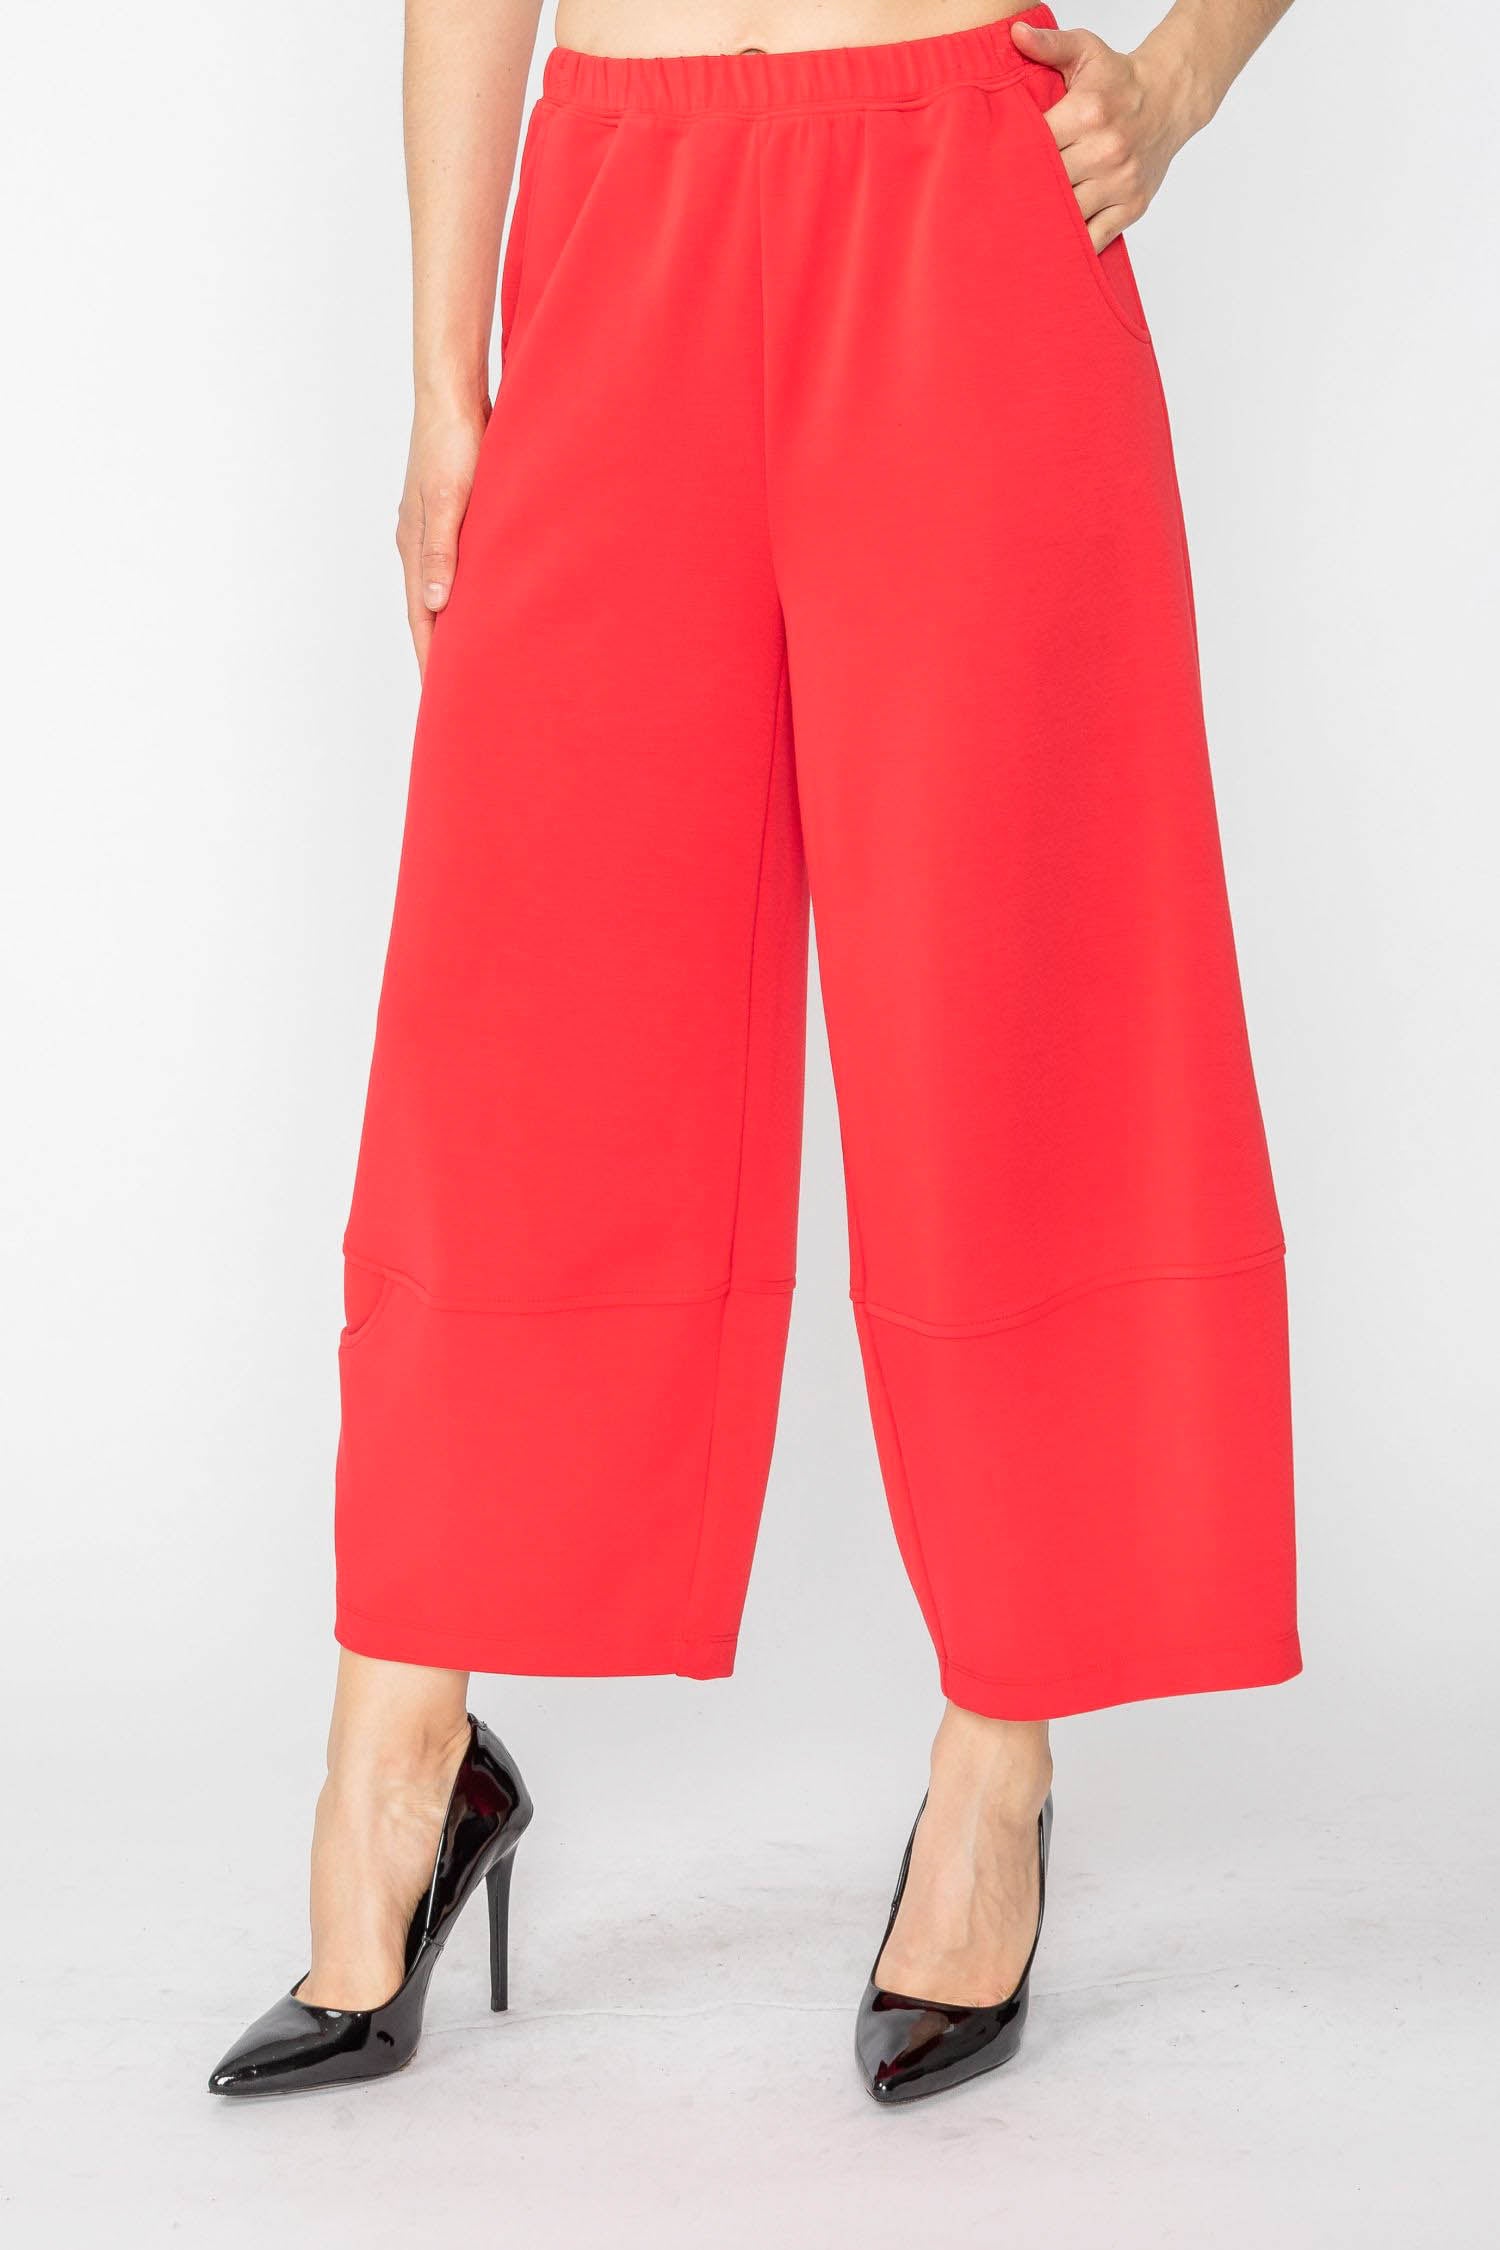 Red Side Pocket Balloon Pants